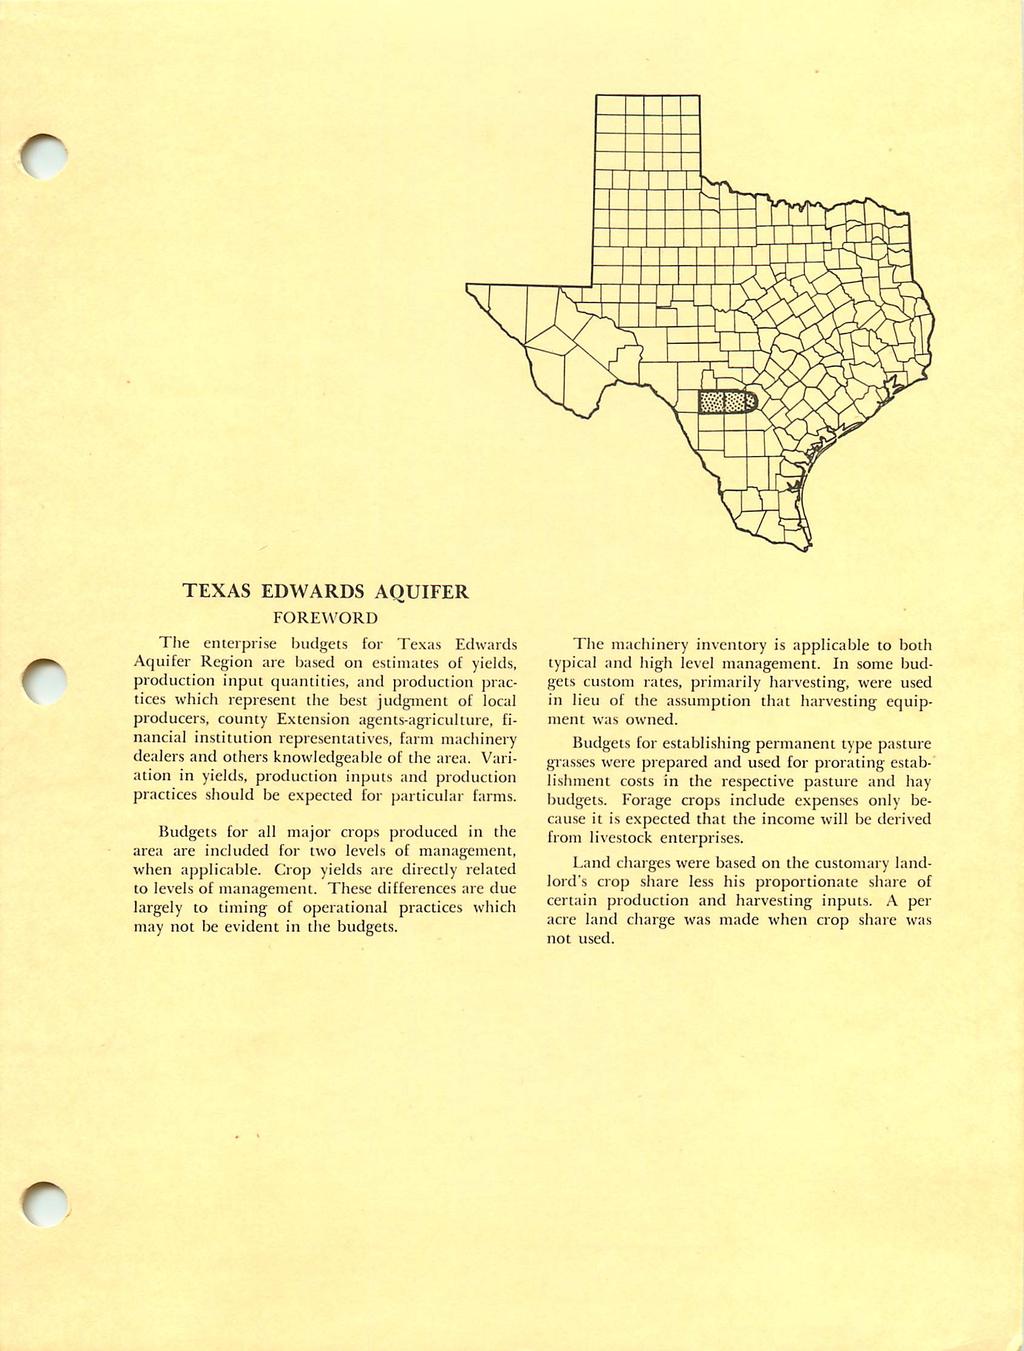 C TEXAS EDWARDS AQUIFER FOREWORD The entepise budgets fo Texas Edwads Aquife Region ae based on estimates of yields, poduction input quantities, and poduction pac tices which epesent the best